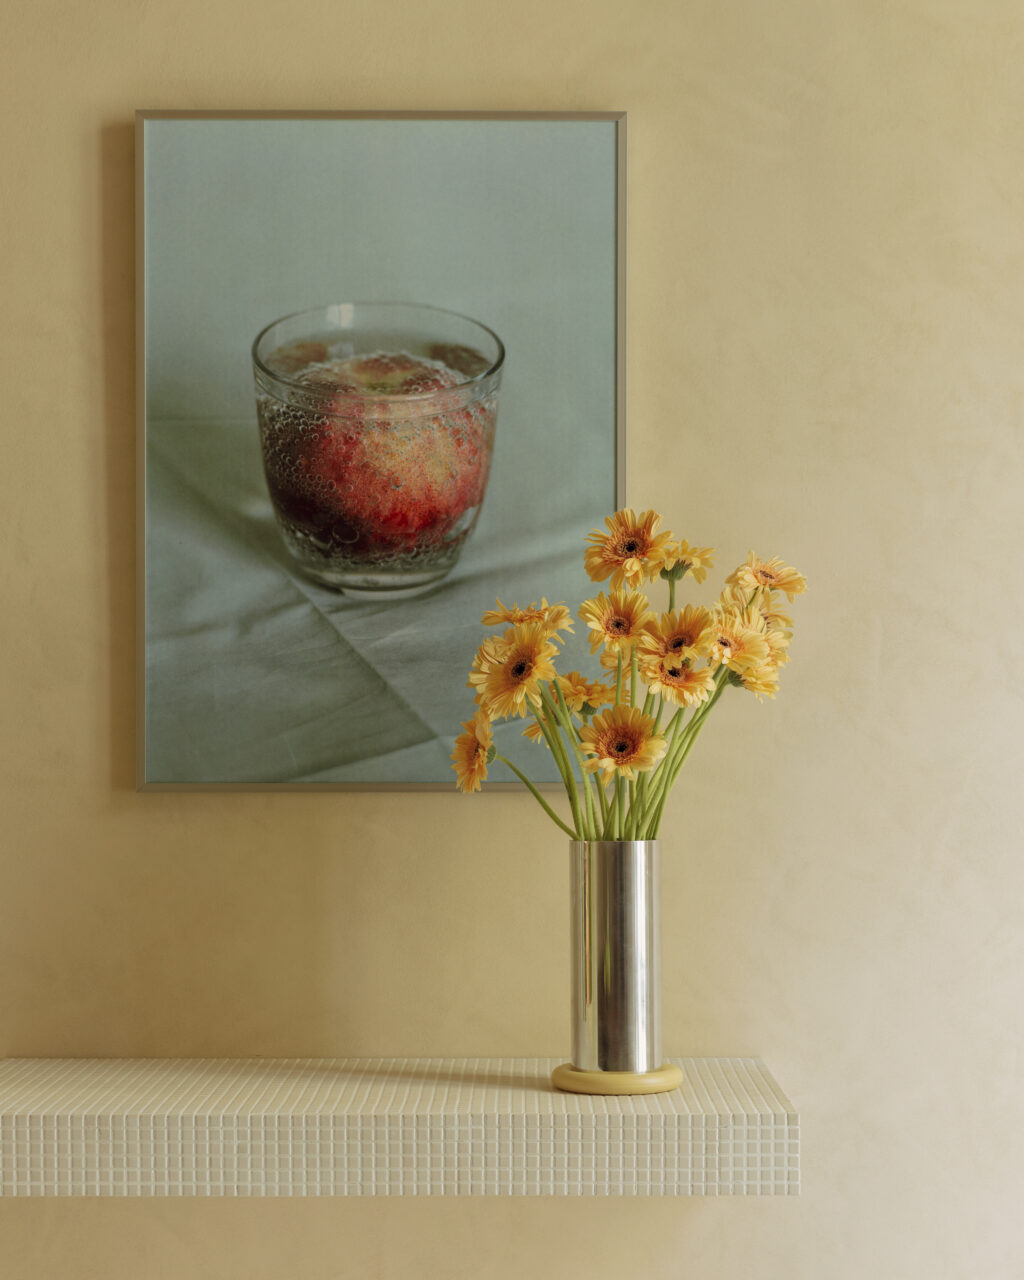 A steel vase with flowers set against a peach-colored wall